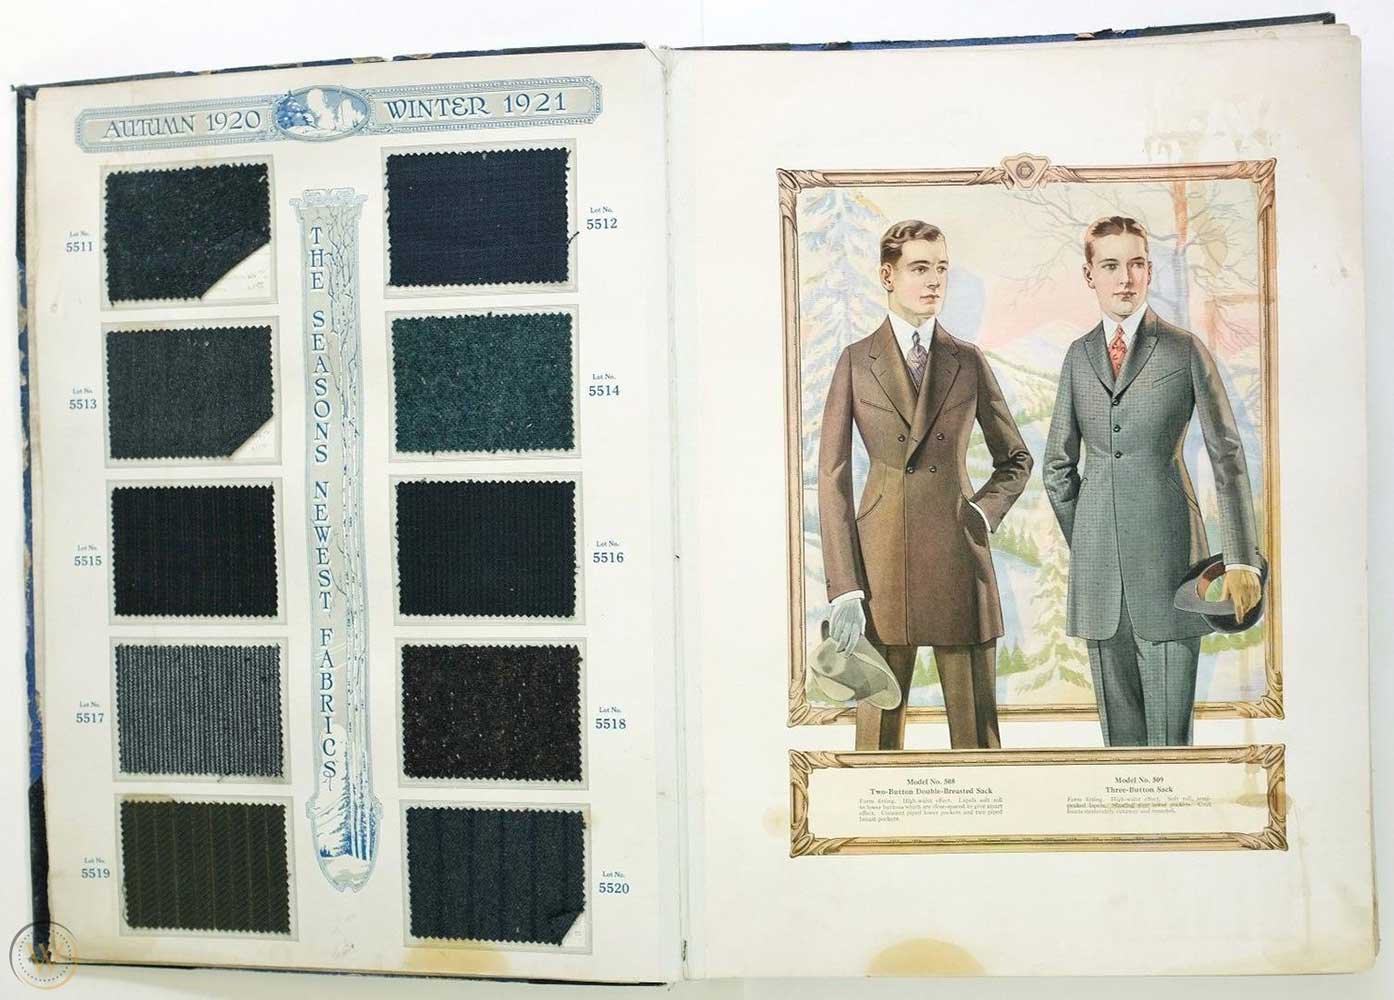 A fabric book for men's suits in the 1920s